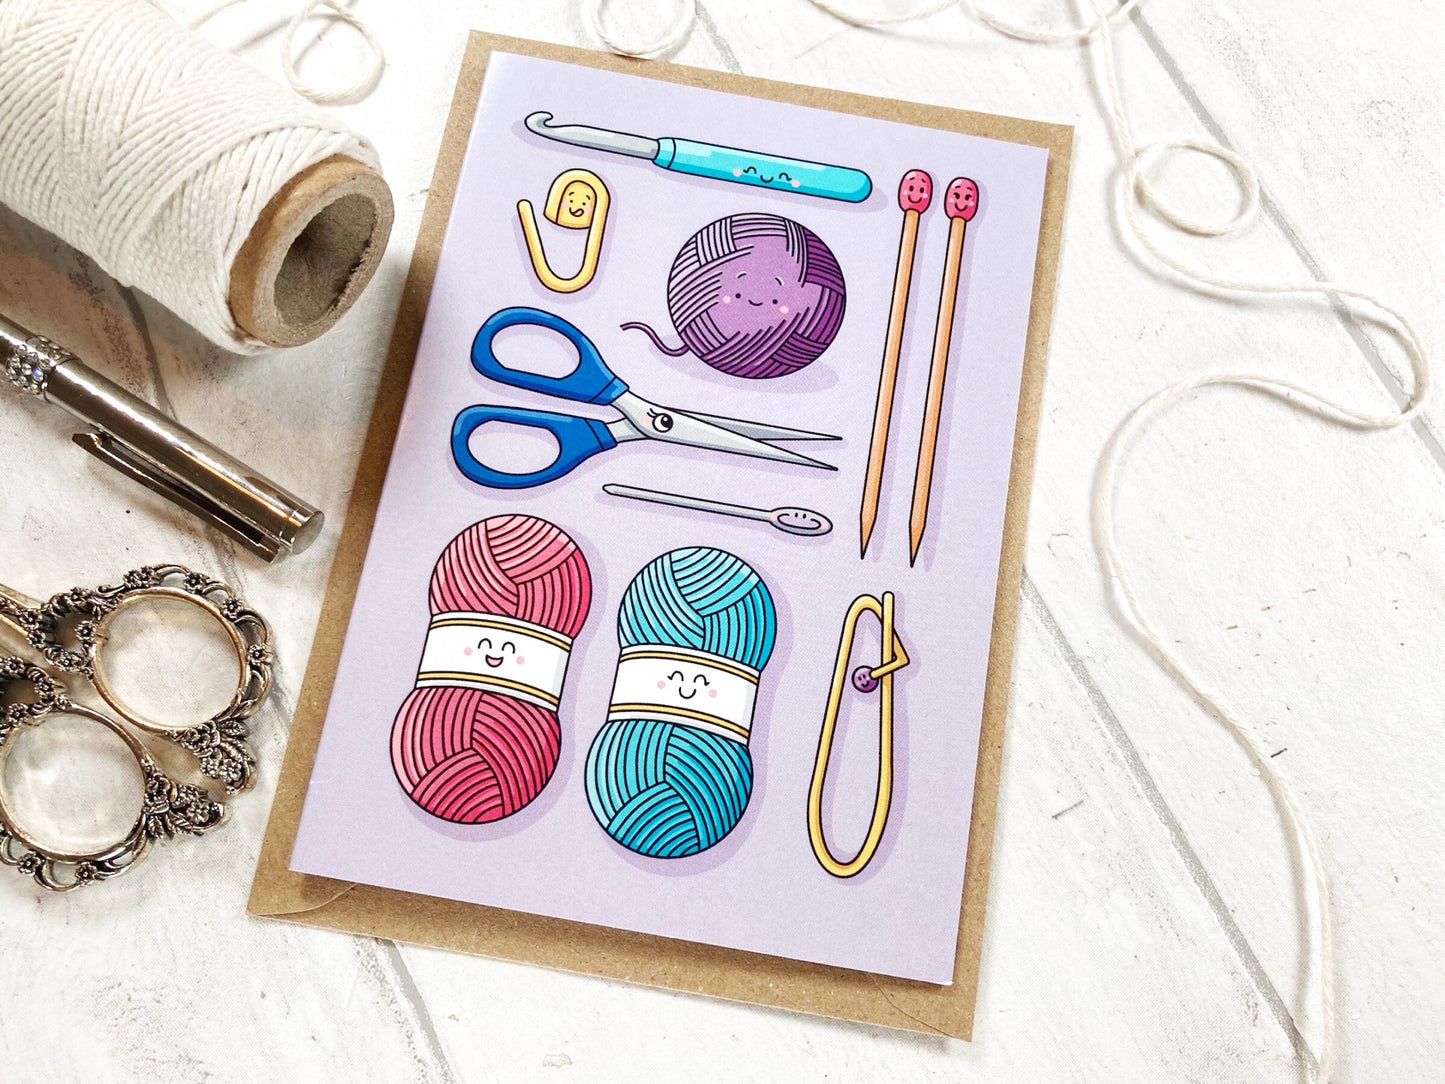 Cute Knit - A6 Greetings Card by Little Green Stitches